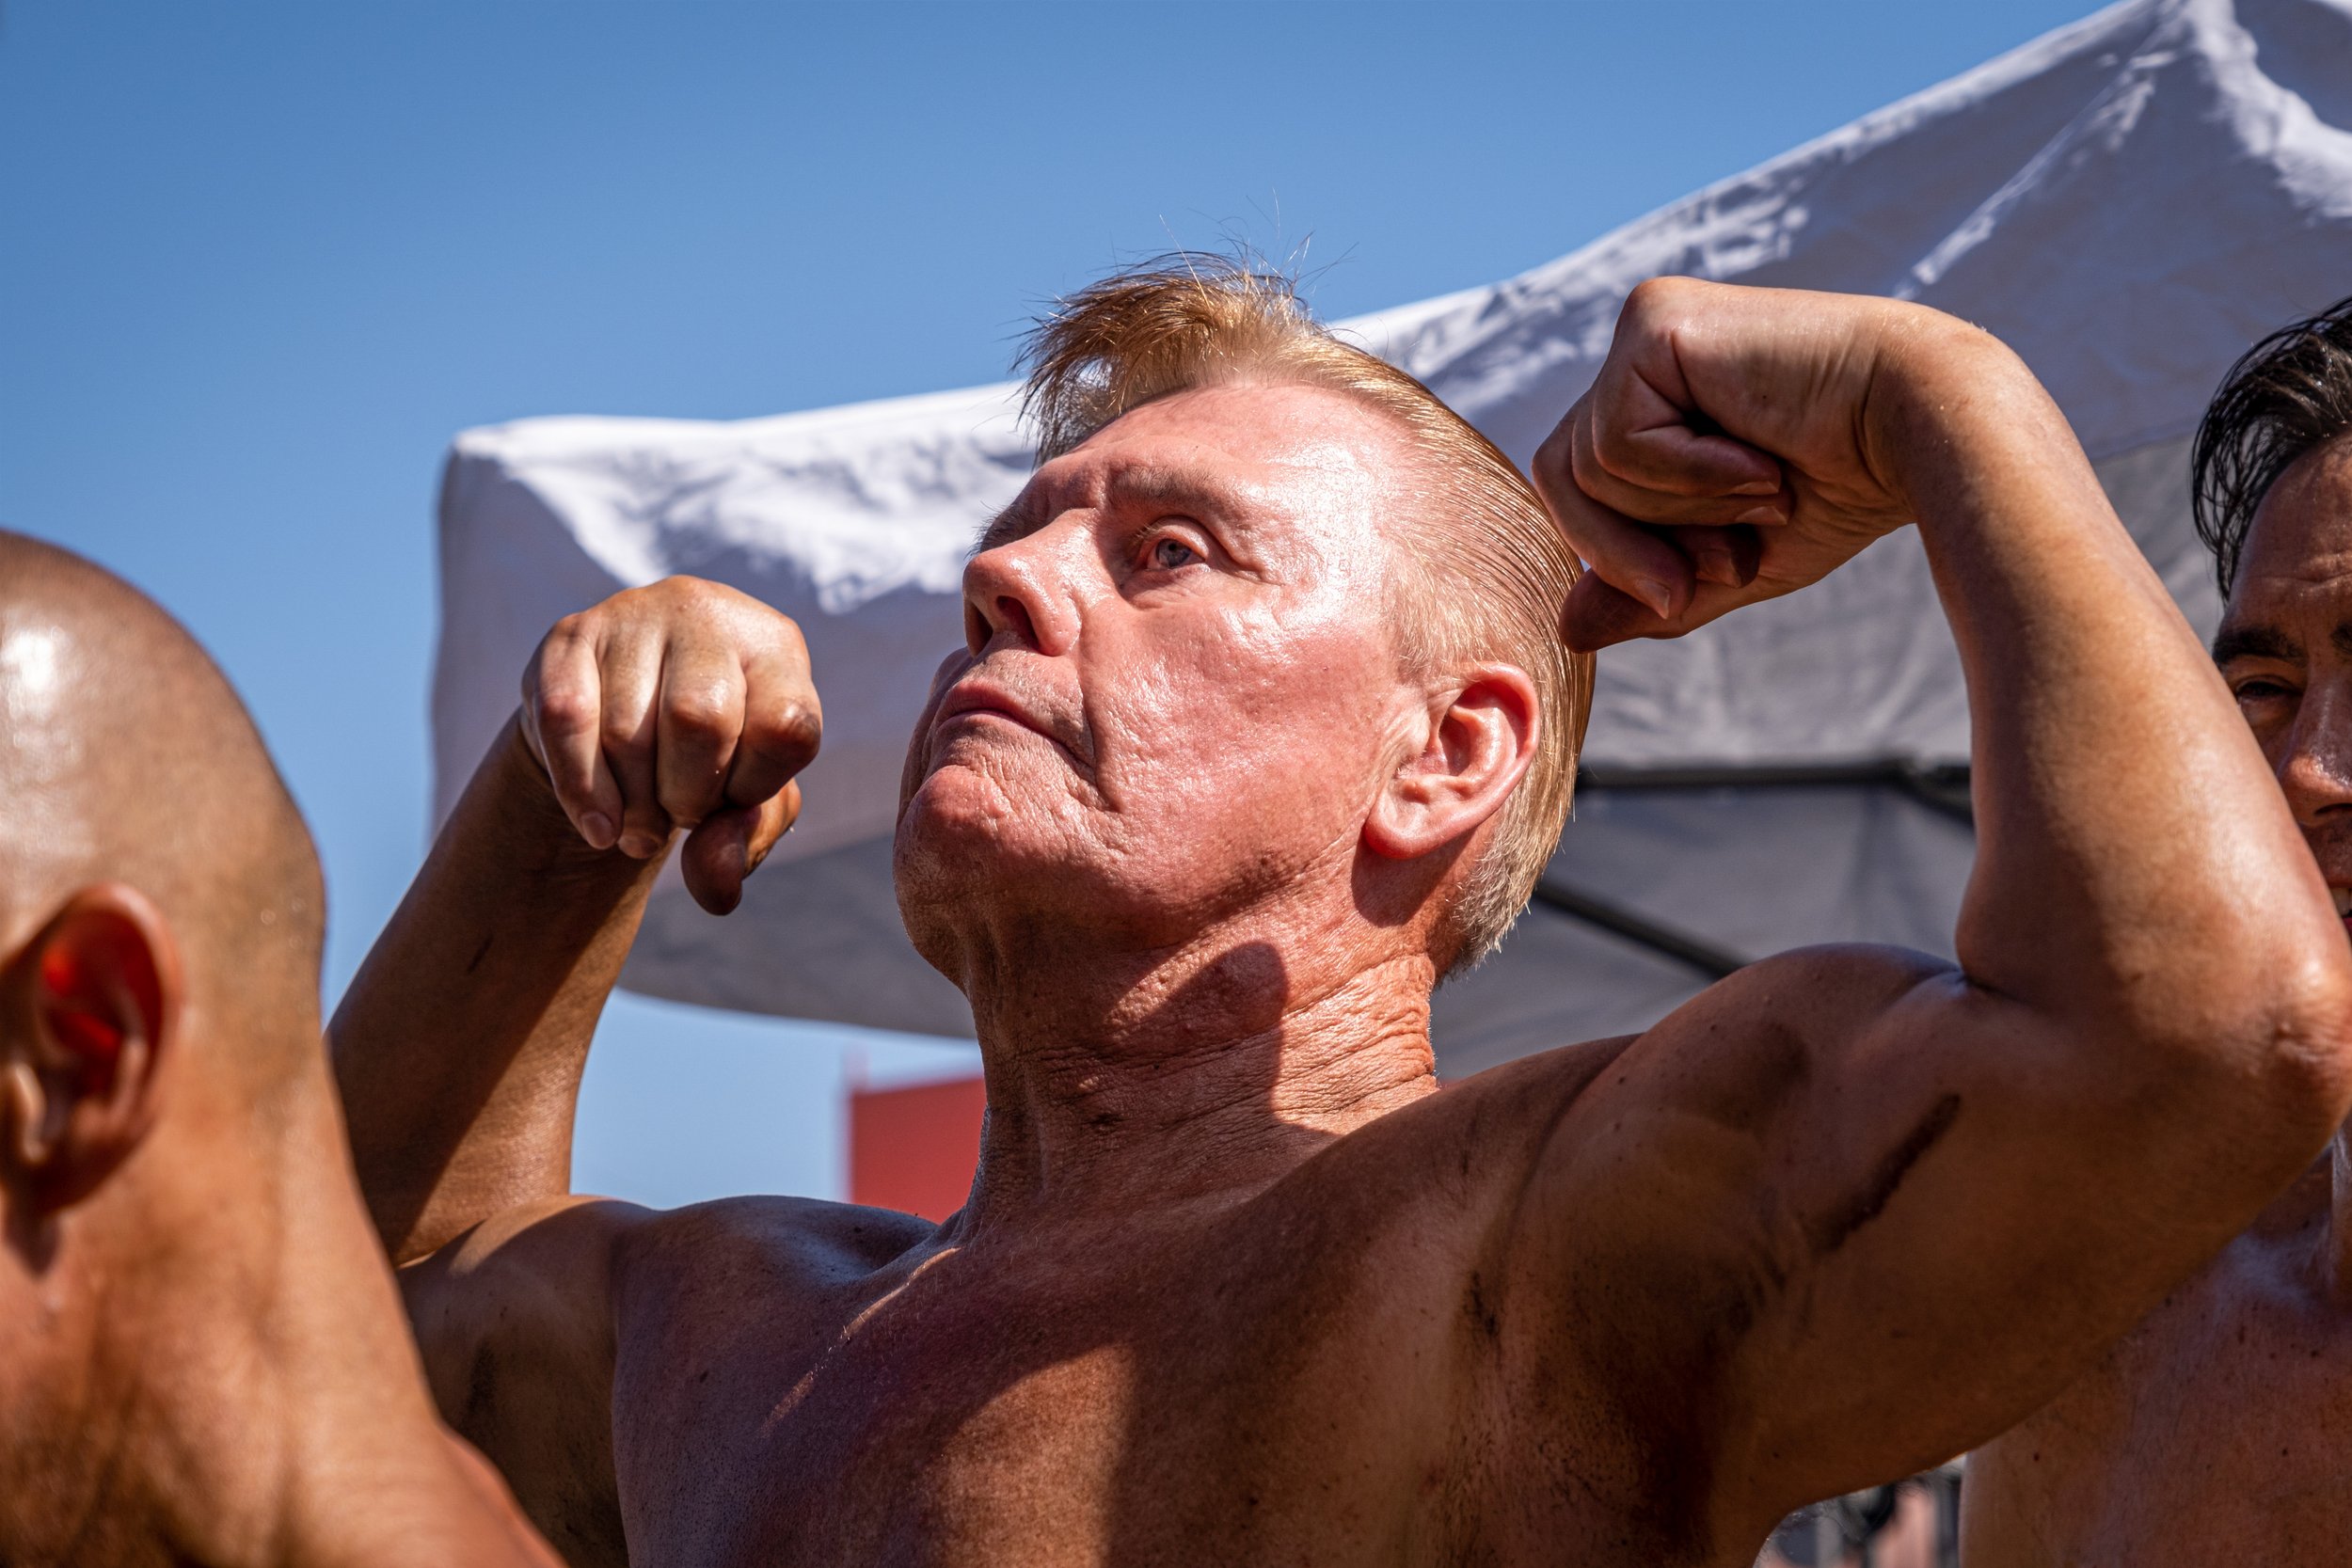  Doug Brolus stands in line to compete in the Master’s Men Over 60 at The Muscle Beach Championship. Brolus used to train with Arnold Schwarzenegger, and still maintains a friendship with him. Venice Beach Recreation Center, in Venice, Calif. on Labo